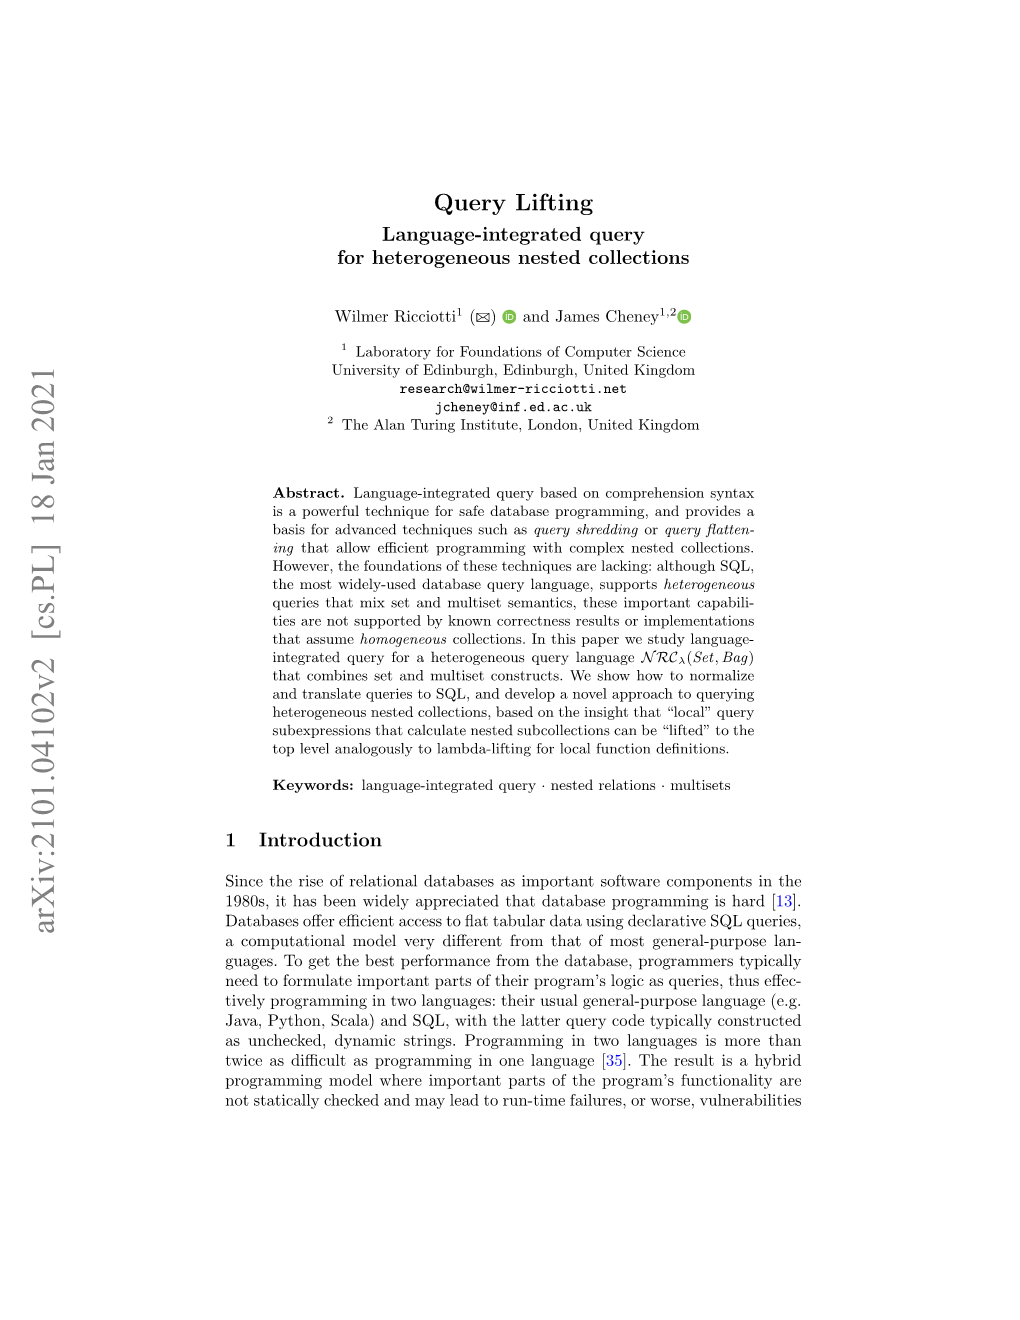 Arxiv:2101.04102V2 [Cs.PL] 18 Jan 2021 a Computational Model Very Diﬀerent from That of Most General-Purpose Lan- Guages